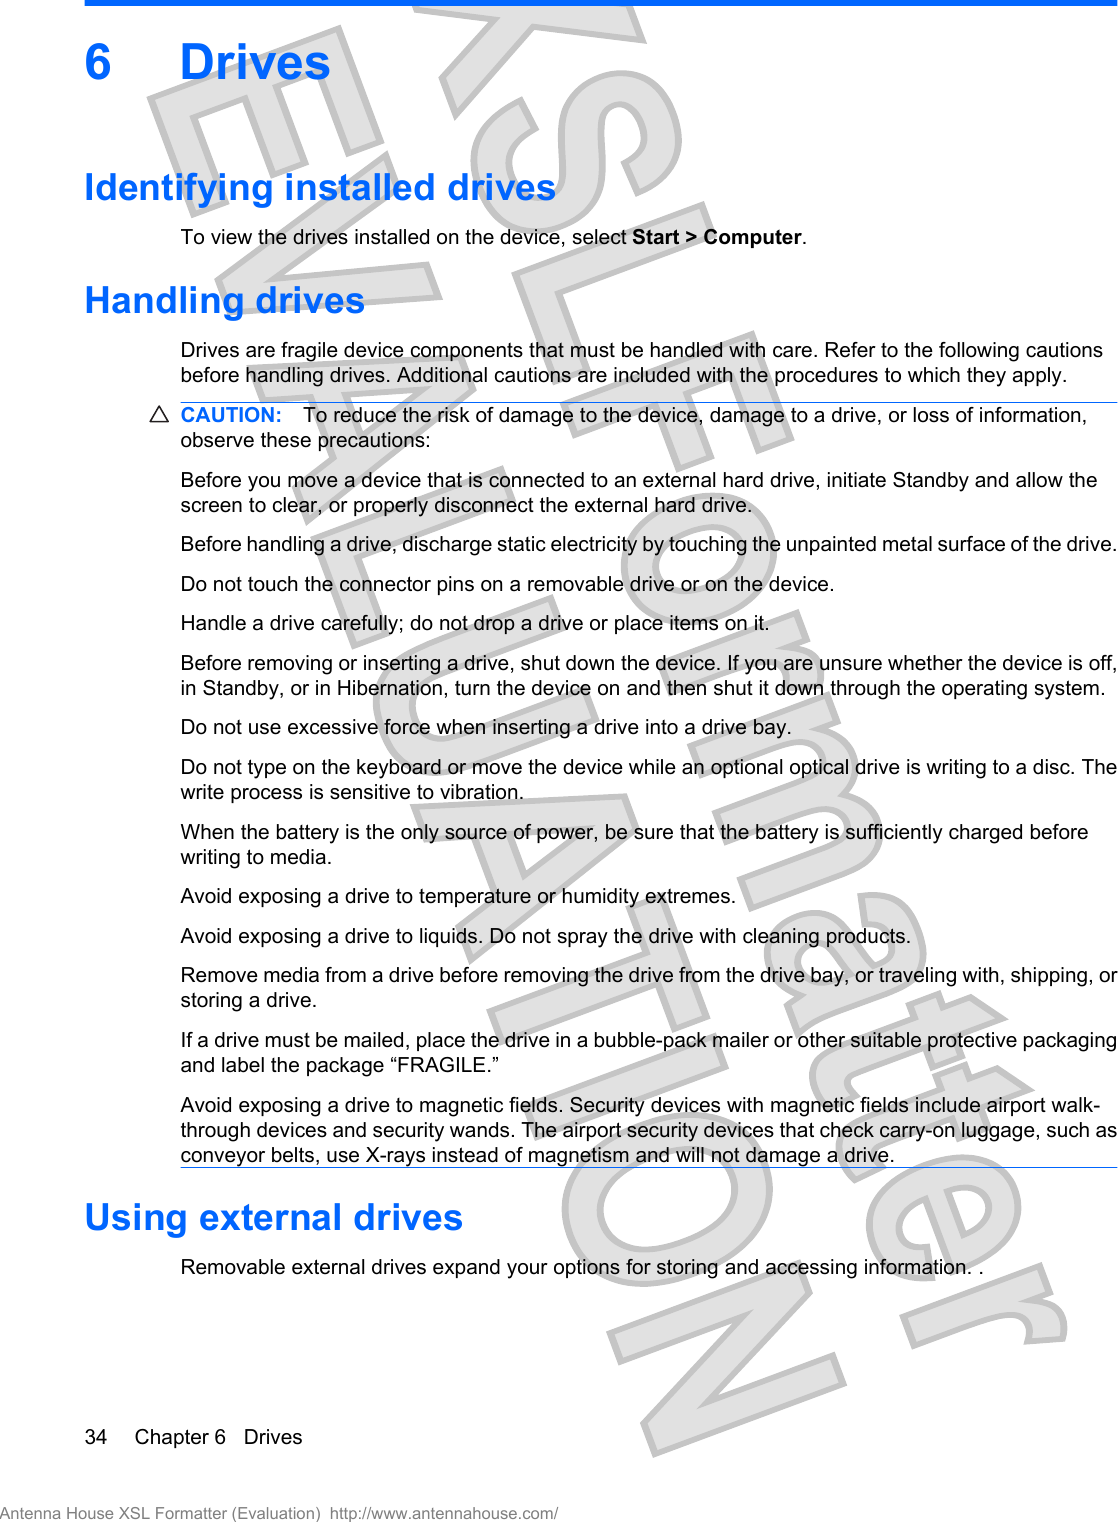 6DrivesIdentifying installed drivesTo view the drives installed on the device, select Start &gt; Computer.Handling drivesDrives are fragile device components that must be handled with care. Refer to the following cautionsbefore handling drives. Additional cautions are included with the procedures to which they apply.CAUTION: To reduce the risk of damage to the device, damage to a drive, or loss of information,observe these precautions:Before you move a device that is connected to an external hard drive, initiate Standby and allow thescreen to clear, or properly disconnect the external hard drive.Before handling a drive, discharge static electricity by touching the unpainted metal surface of the drive.Do not touch the connector pins on a removable drive or on the device.Handle a drive carefully; do not drop a drive or place items on it.Before removing or inserting a drive, shut down the device. If you are unsure whether the device is off,in Standby, or in Hibernation, turn the device on and then shut it down through the operating system.Do not use excessive force when inserting a drive into a drive bay.Do not type on the keyboard or move the device while an optional optical drive is writing to a disc. Thewrite process is sensitive to vibration.When the battery is the only source of power, be sure that the battery is sufficiently charged beforewriting to media.Avoid exposing a drive to temperature or humidity extremes.Avoid exposing a drive to liquids. Do not spray the drive with cleaning products.Remove media from a drive before removing the drive from the drive bay, or traveling with, shipping, orstoring a drive.If a drive must be mailed, place the drive in a bubble-pack mailer or other suitable protective packagingand label the package “FRAGILE.”Avoid exposing a drive to magnetic fields. Security devices with magnetic fields include airport walk-through devices and security wands. The airport security devices that check carry-on luggage, such asconveyor belts, use X-rays instead of magnetism and will not damage a drive.Using external drivesRemovable external drives expand your options for storing and accessing information. .34 Chapter 6   DrivesAntenna House XSL Formatter (Evaluation)  http://www.antennahouse.com/